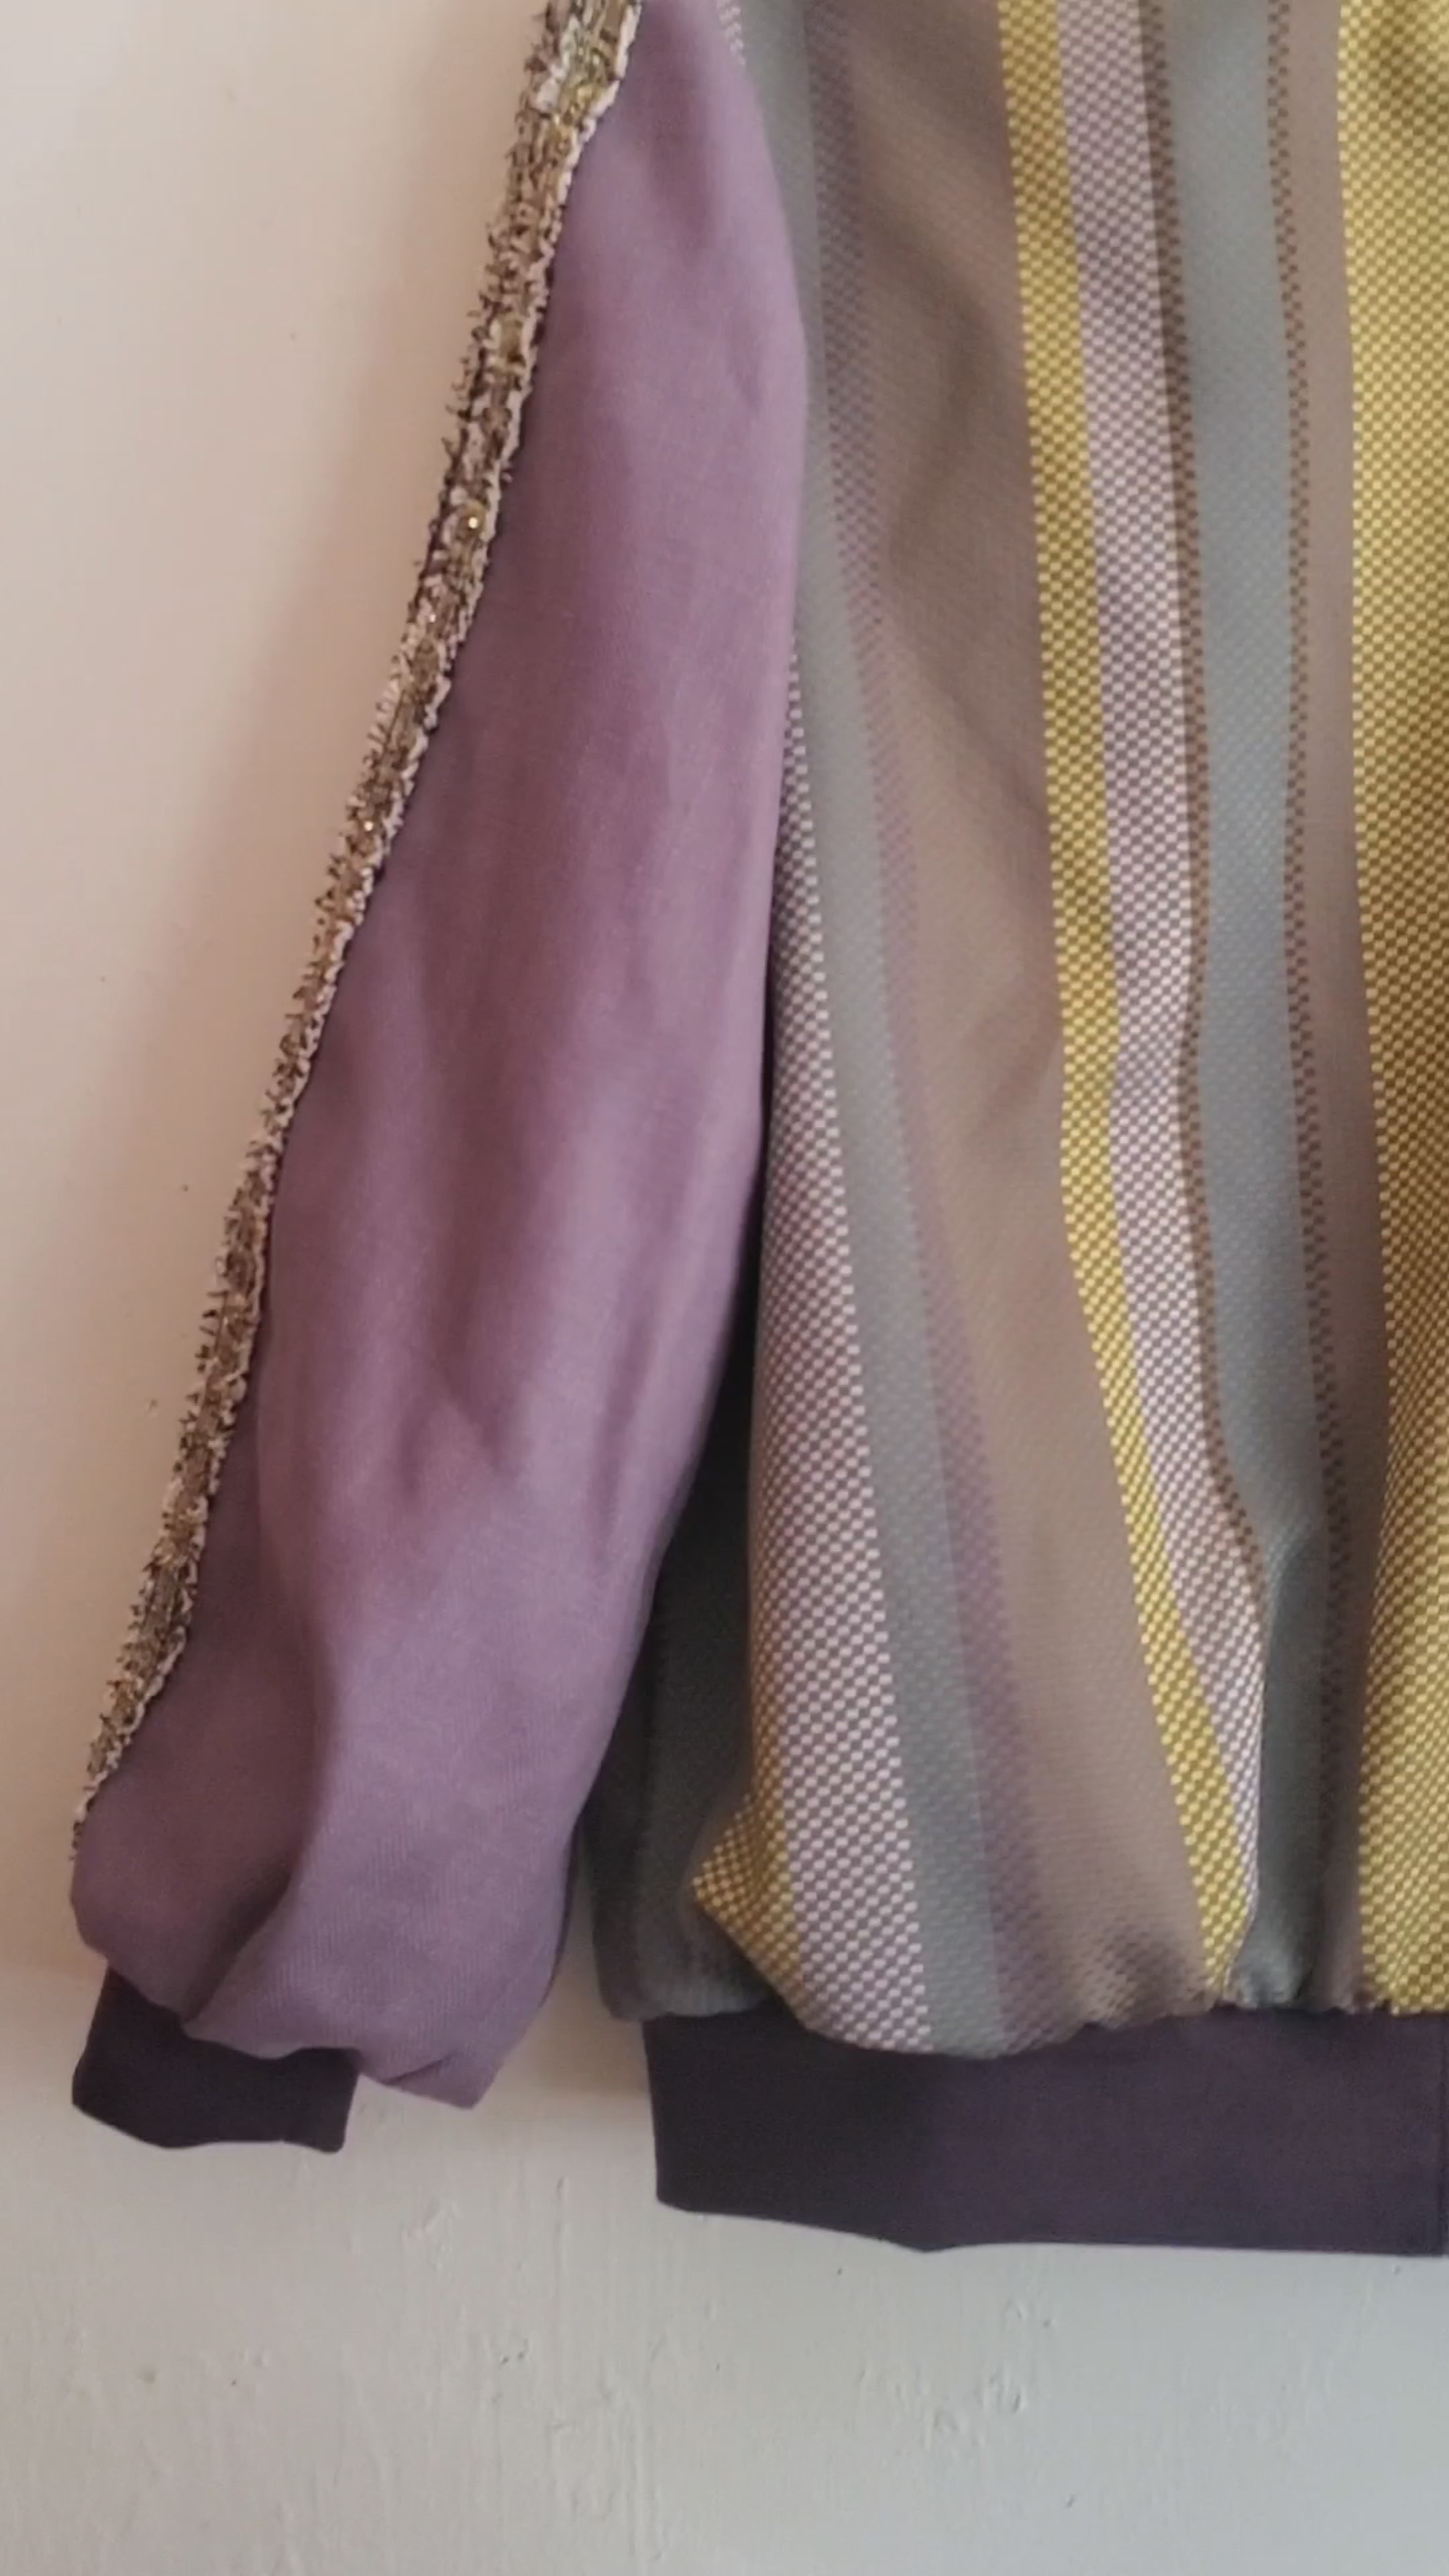 Video of Purple striped jacquard bomber jacket with racing striped sleeves